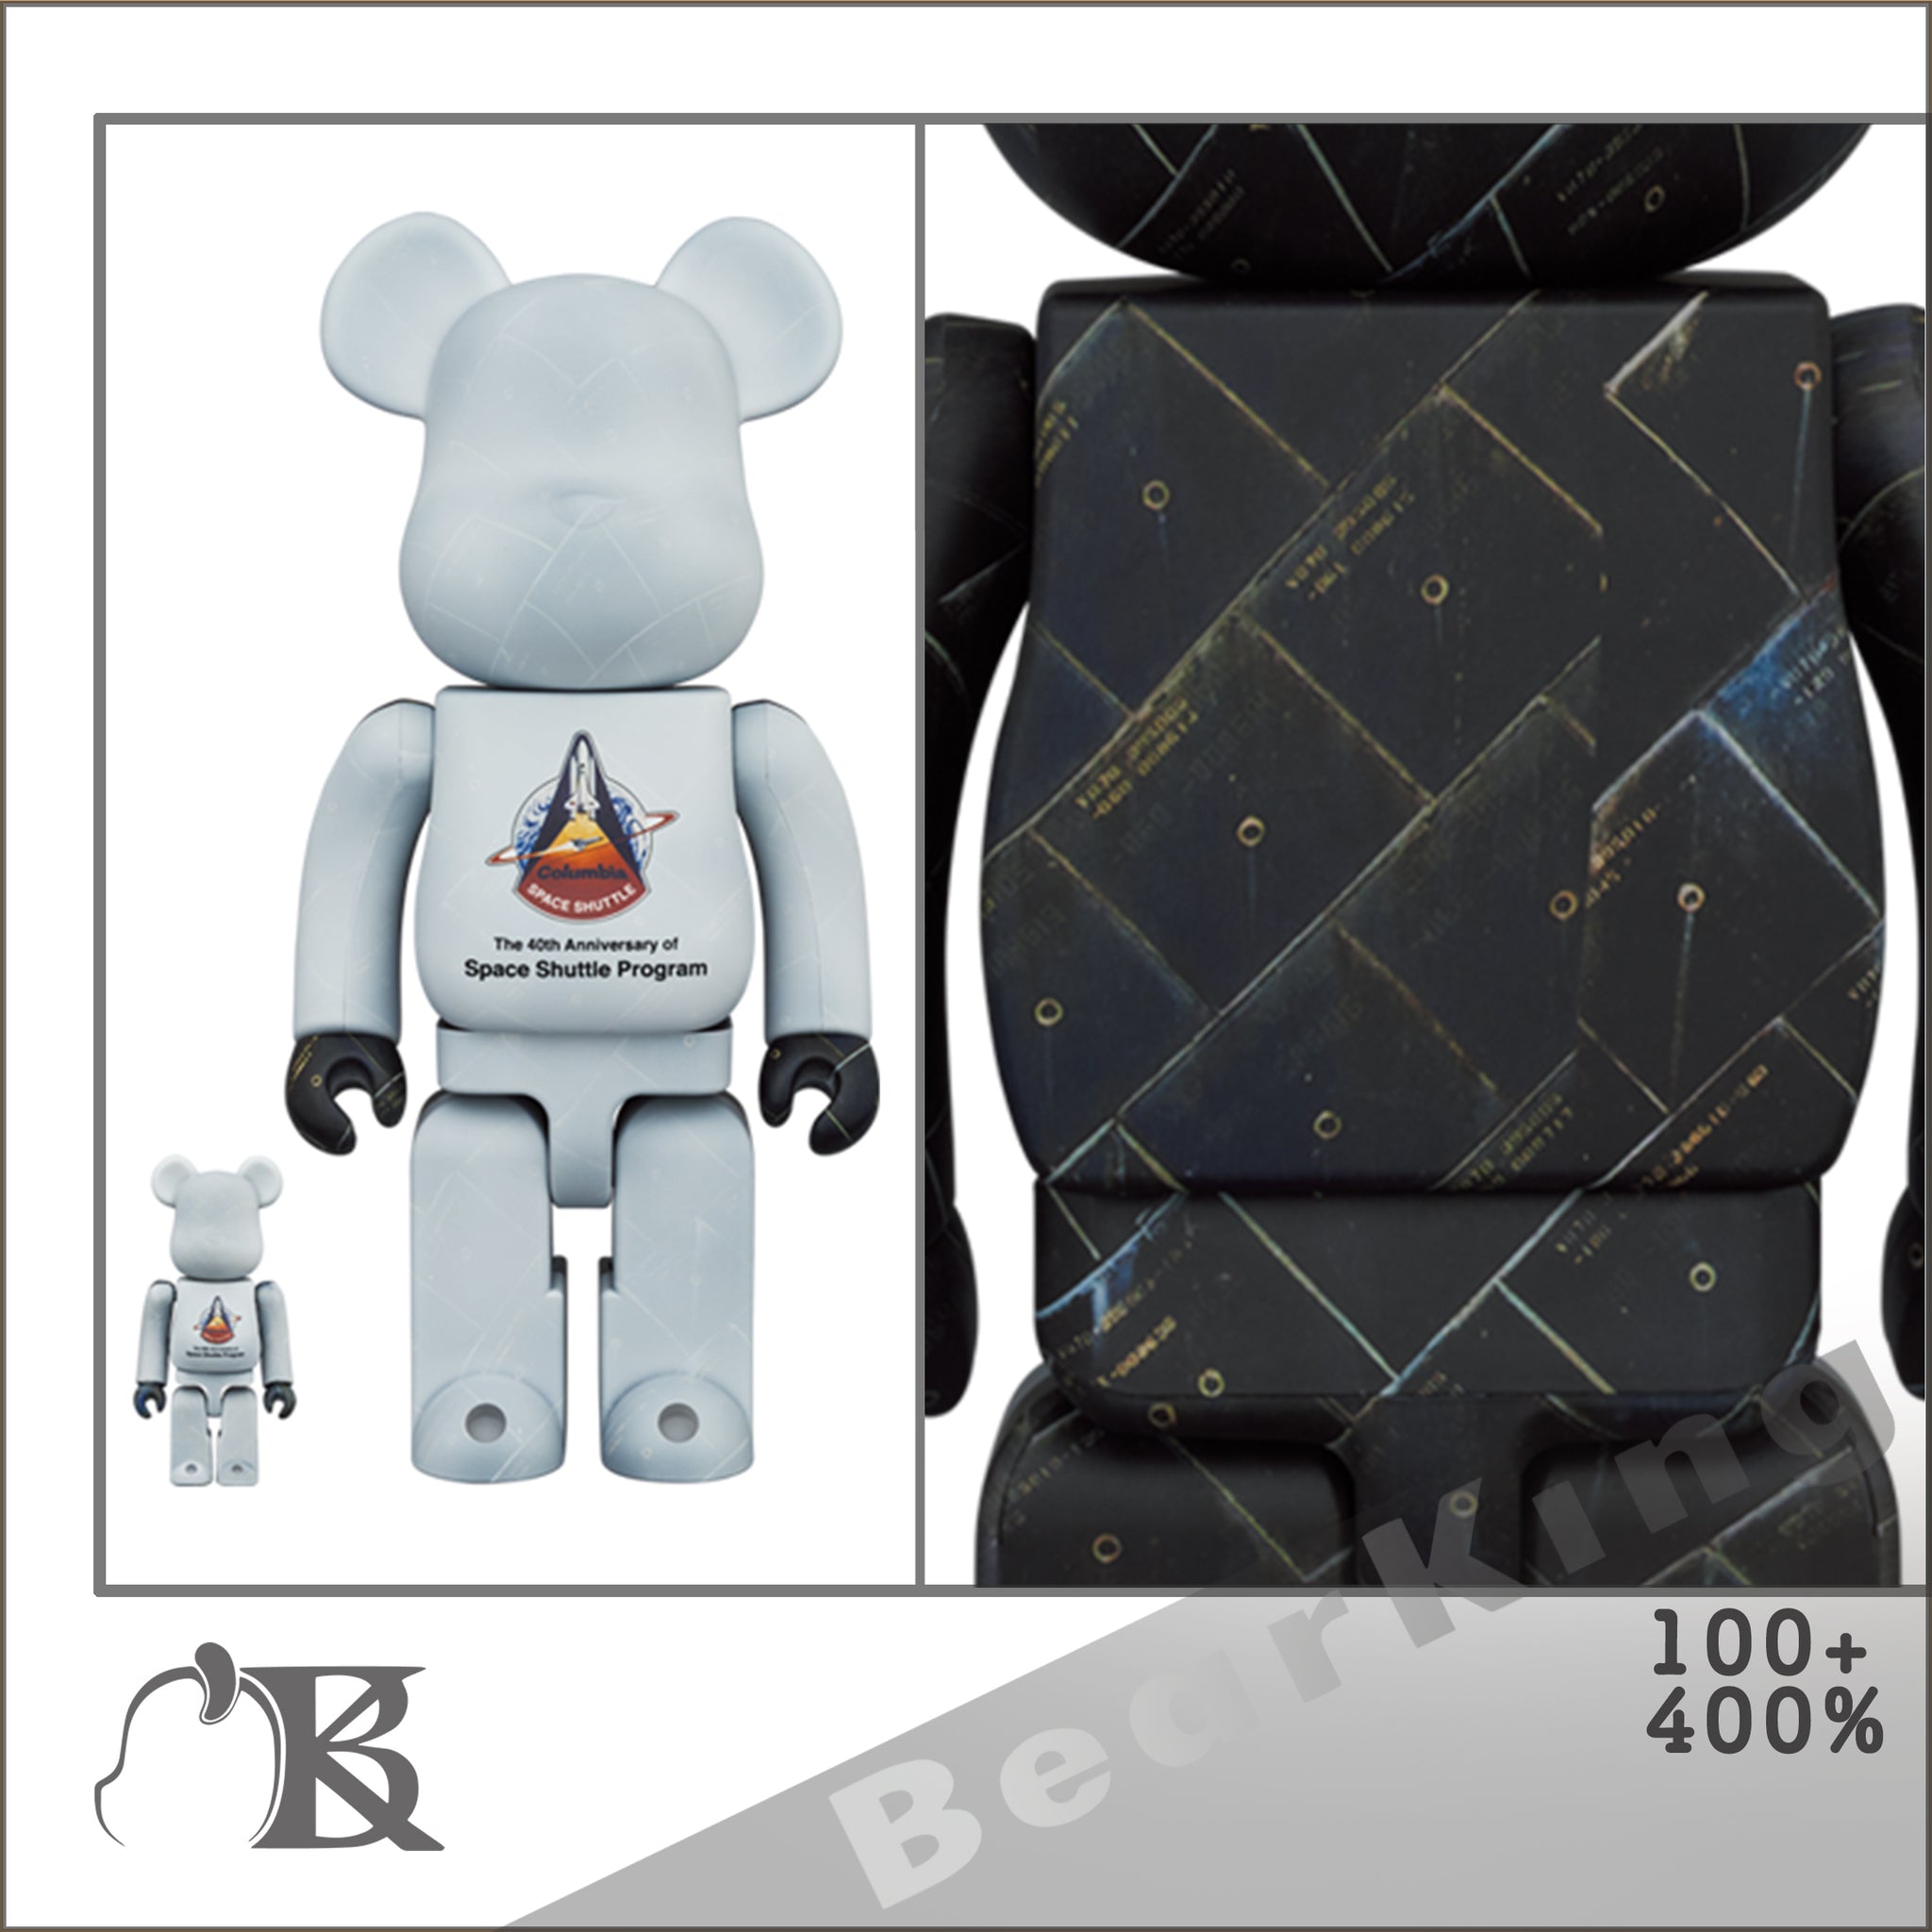 BE@RBRICK SPACE SHUTTLE 100% & 400%